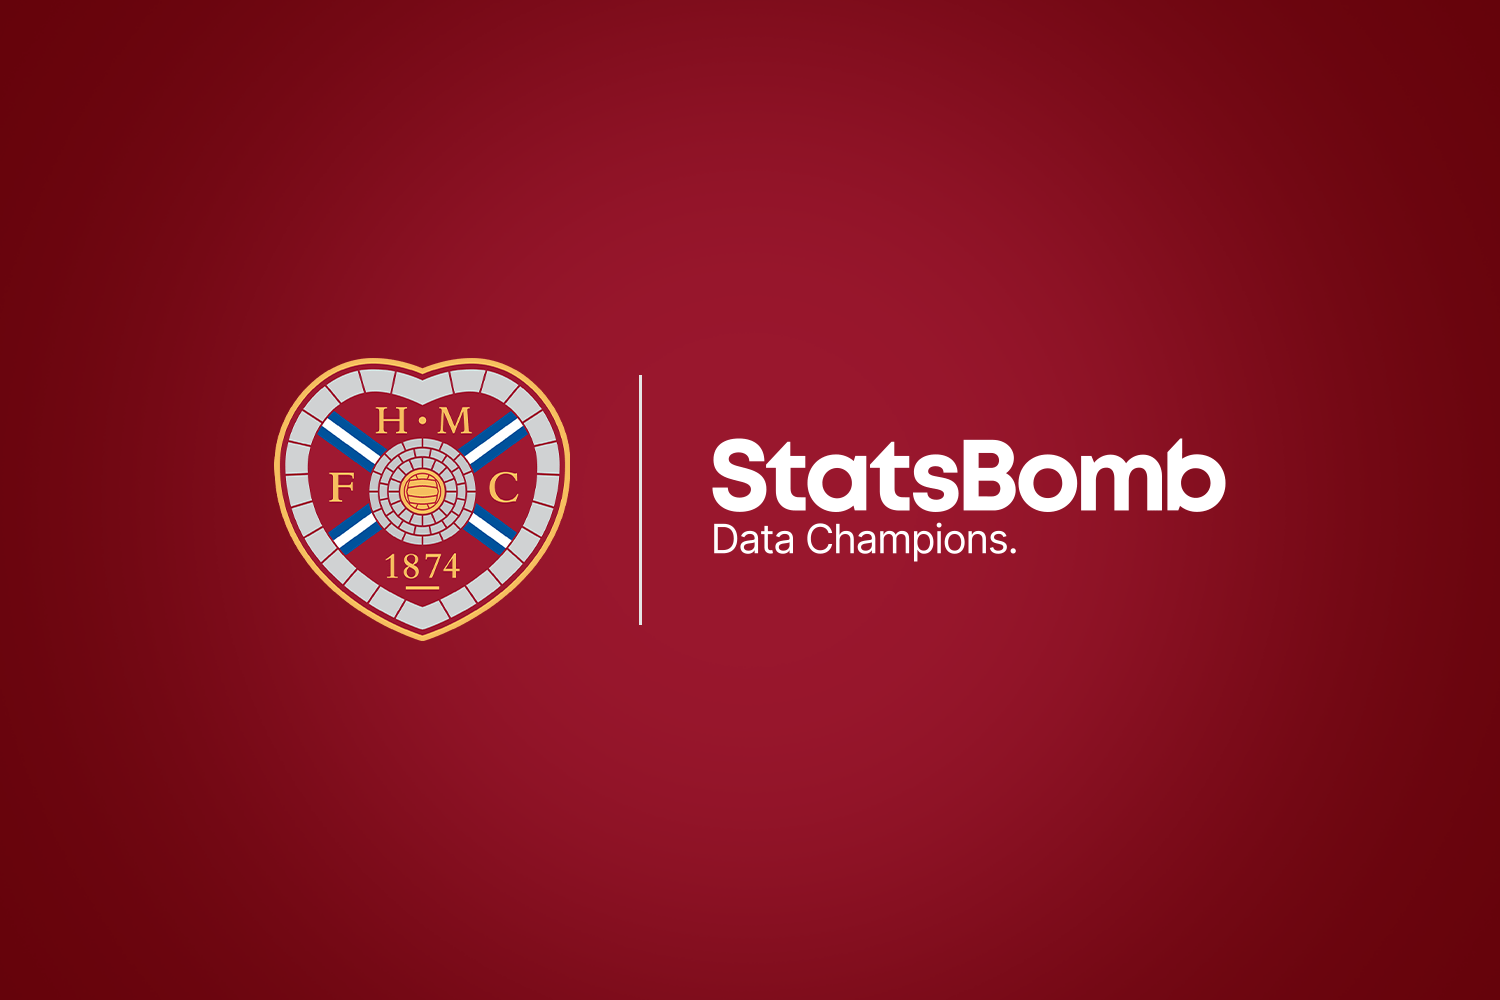 StatsBomb Strengthens Presence In The Scottish Market With Hearts FC Partnership